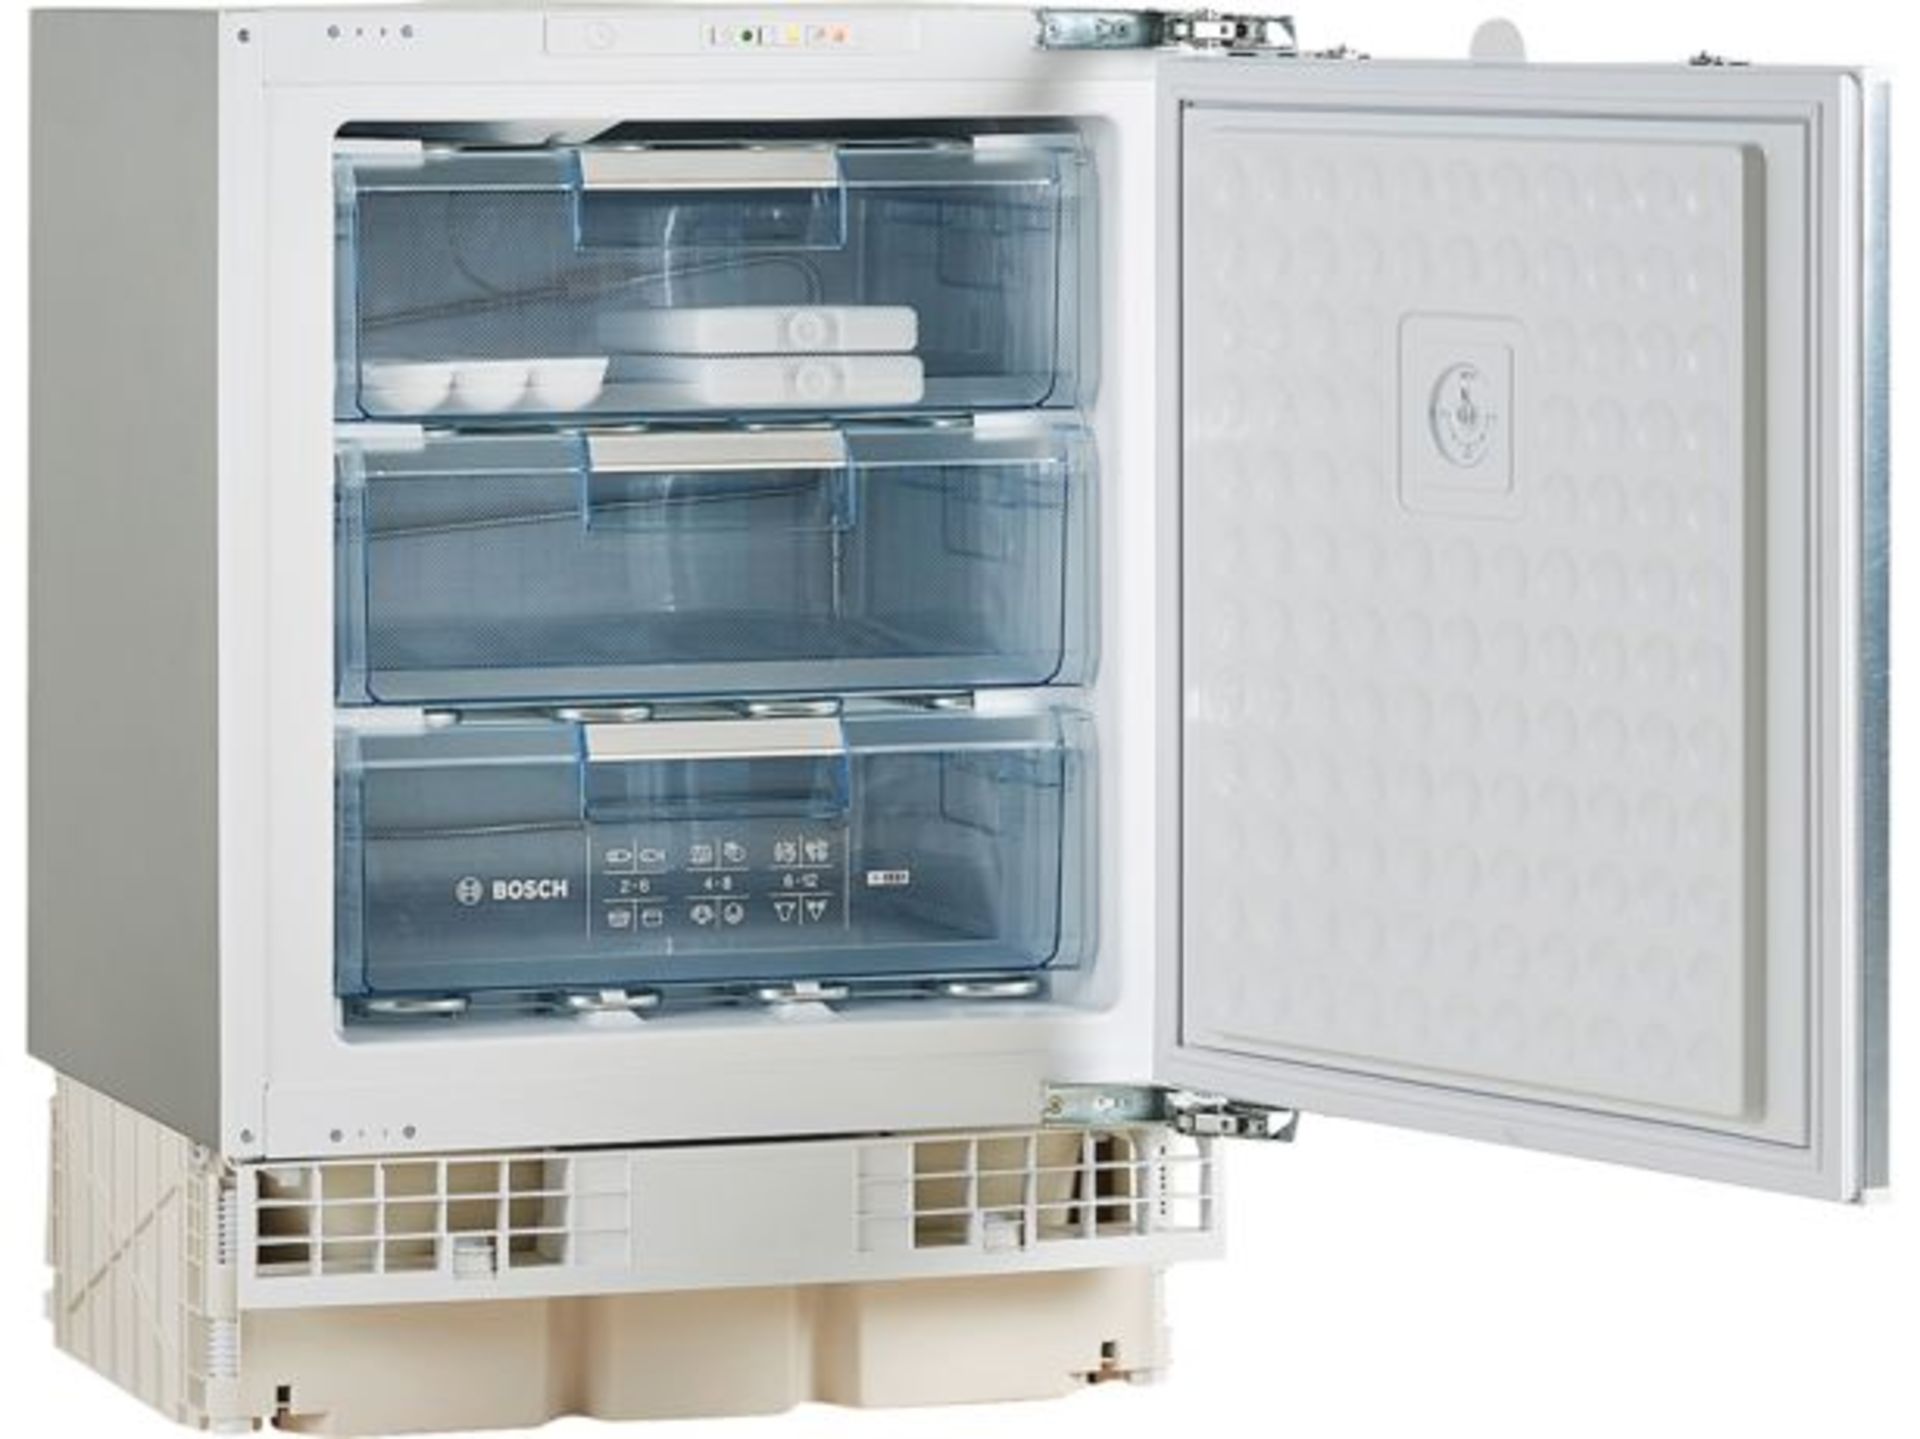 Bosch GUD15AFF0G Built Under Freezer. - H/S. RRP £649.00. Adding new food to the freezer raises - Image 2 of 2